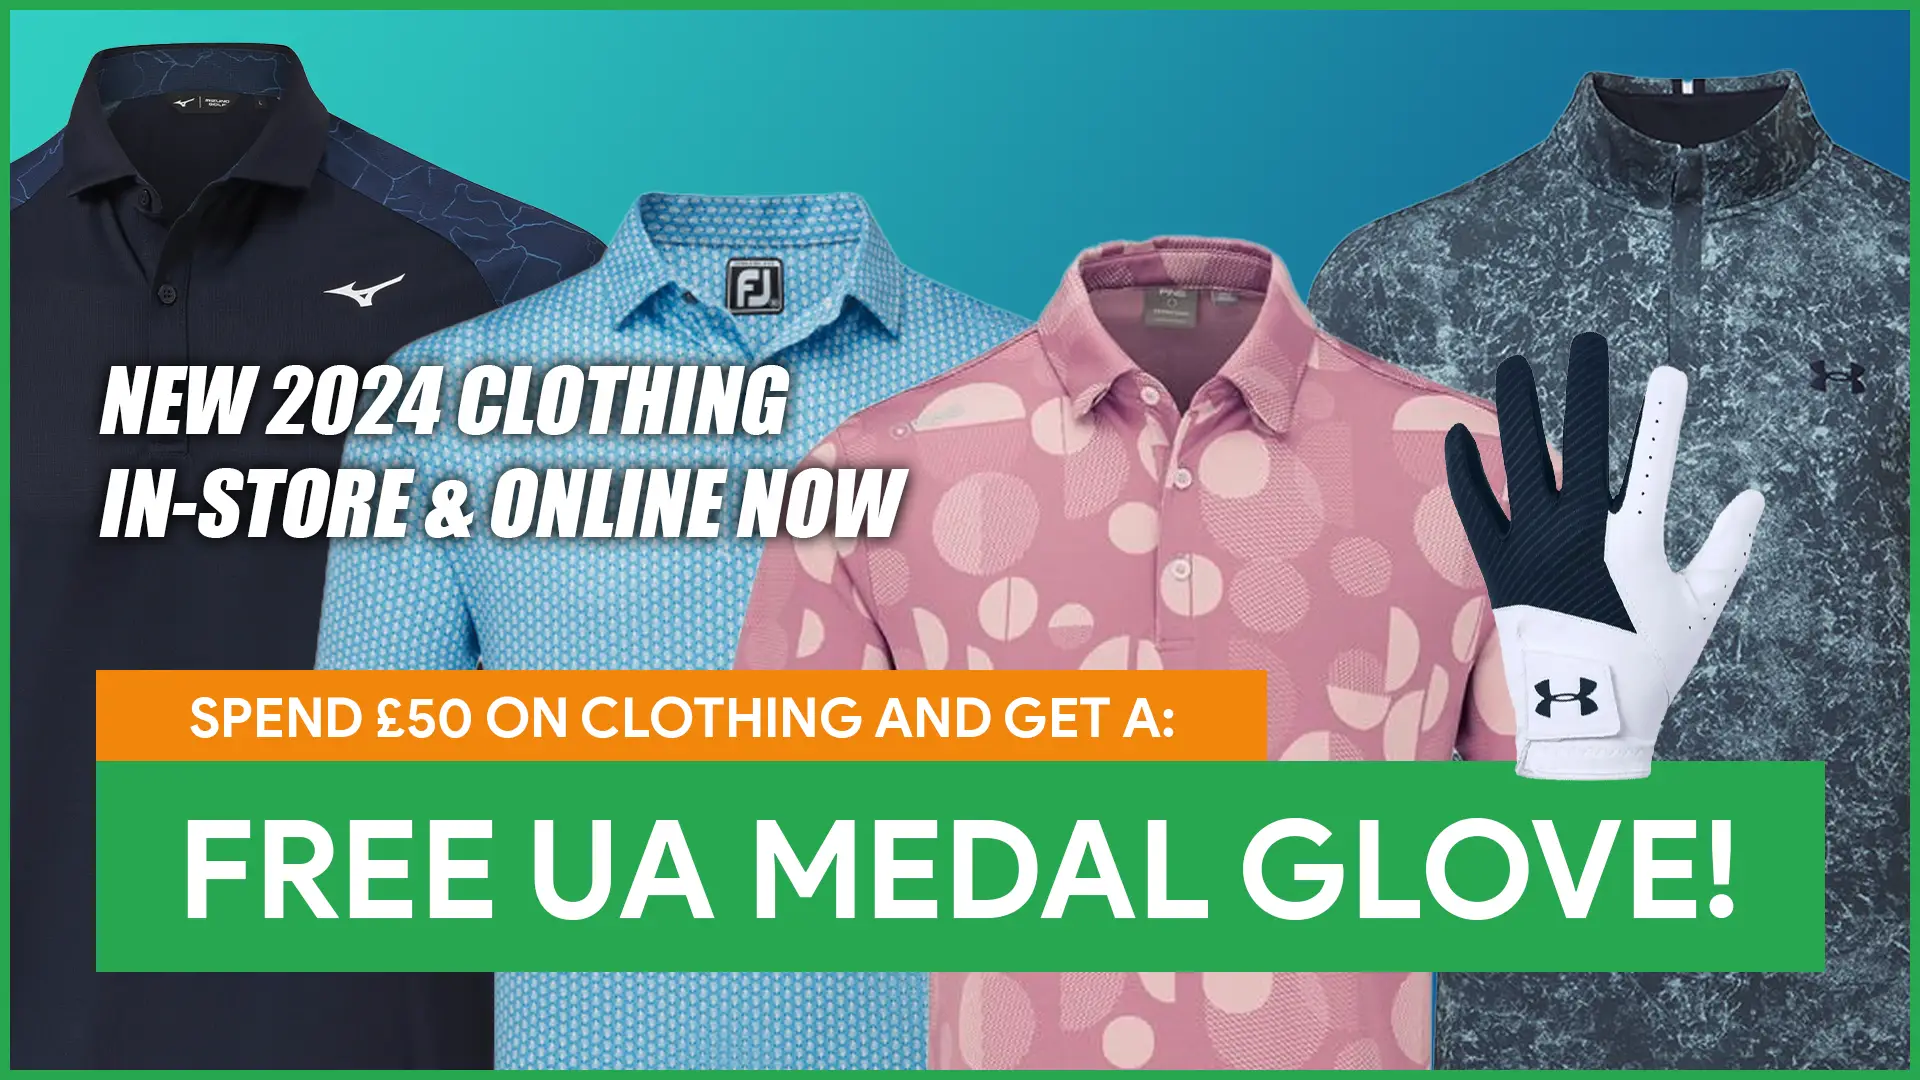 FREE-UA-MEDAL-GLOVE-WHEN-YOU-SPEND-50 copy